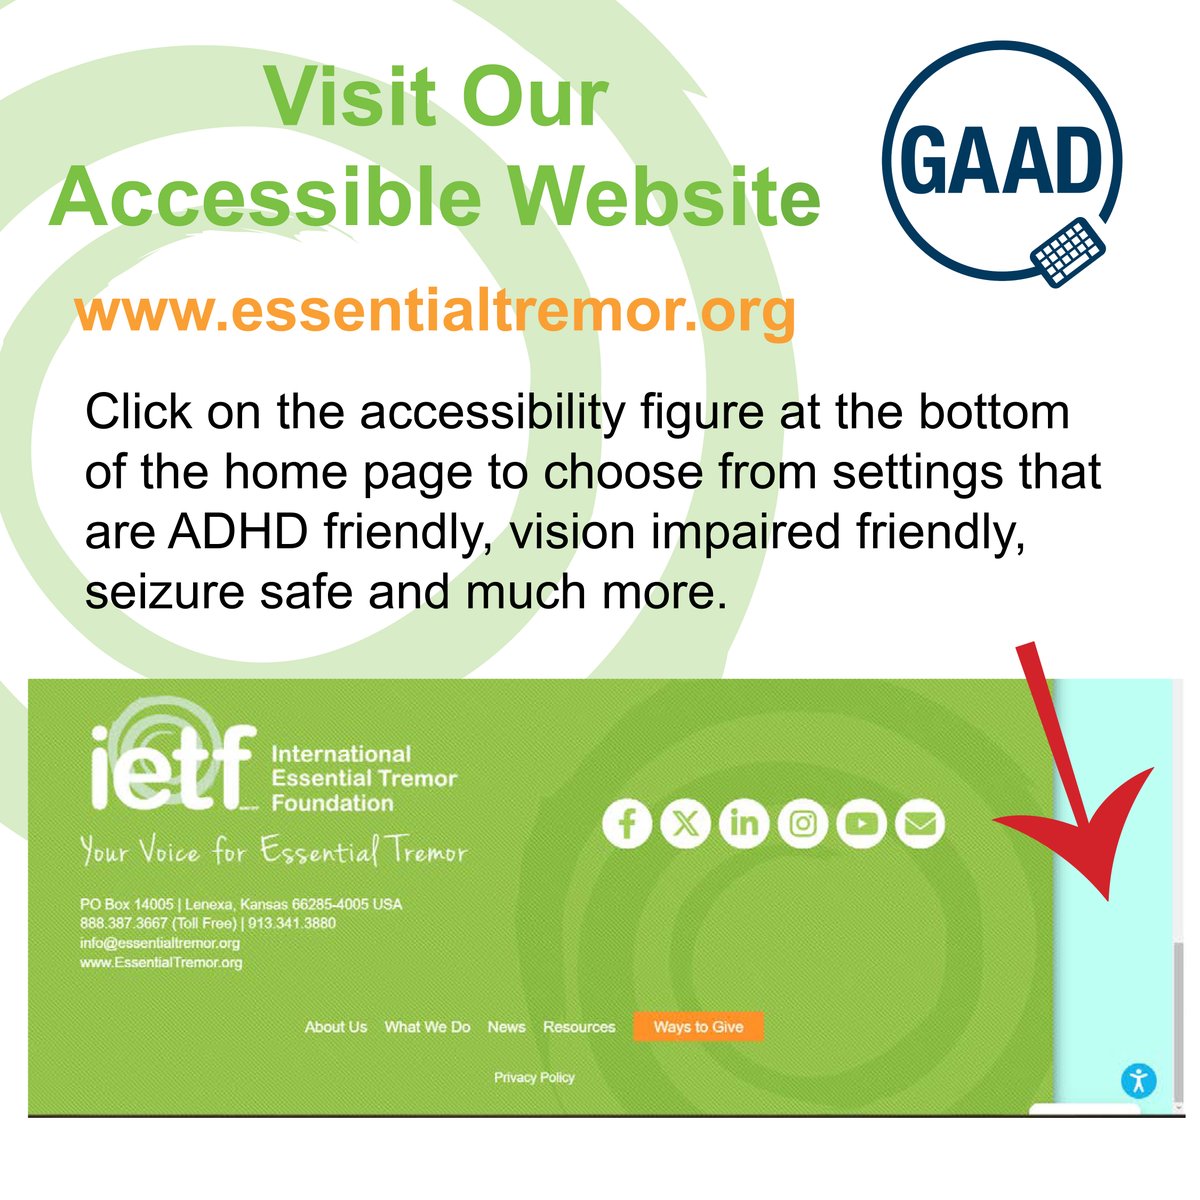 Today is Global Accessibility Awareness Day, a day to highlight digital access and inclusion for people with disabilities. The IETF website has several profiles to support individuals who are vision impaired, struggle with seizures & much more. essentialtremor.org.